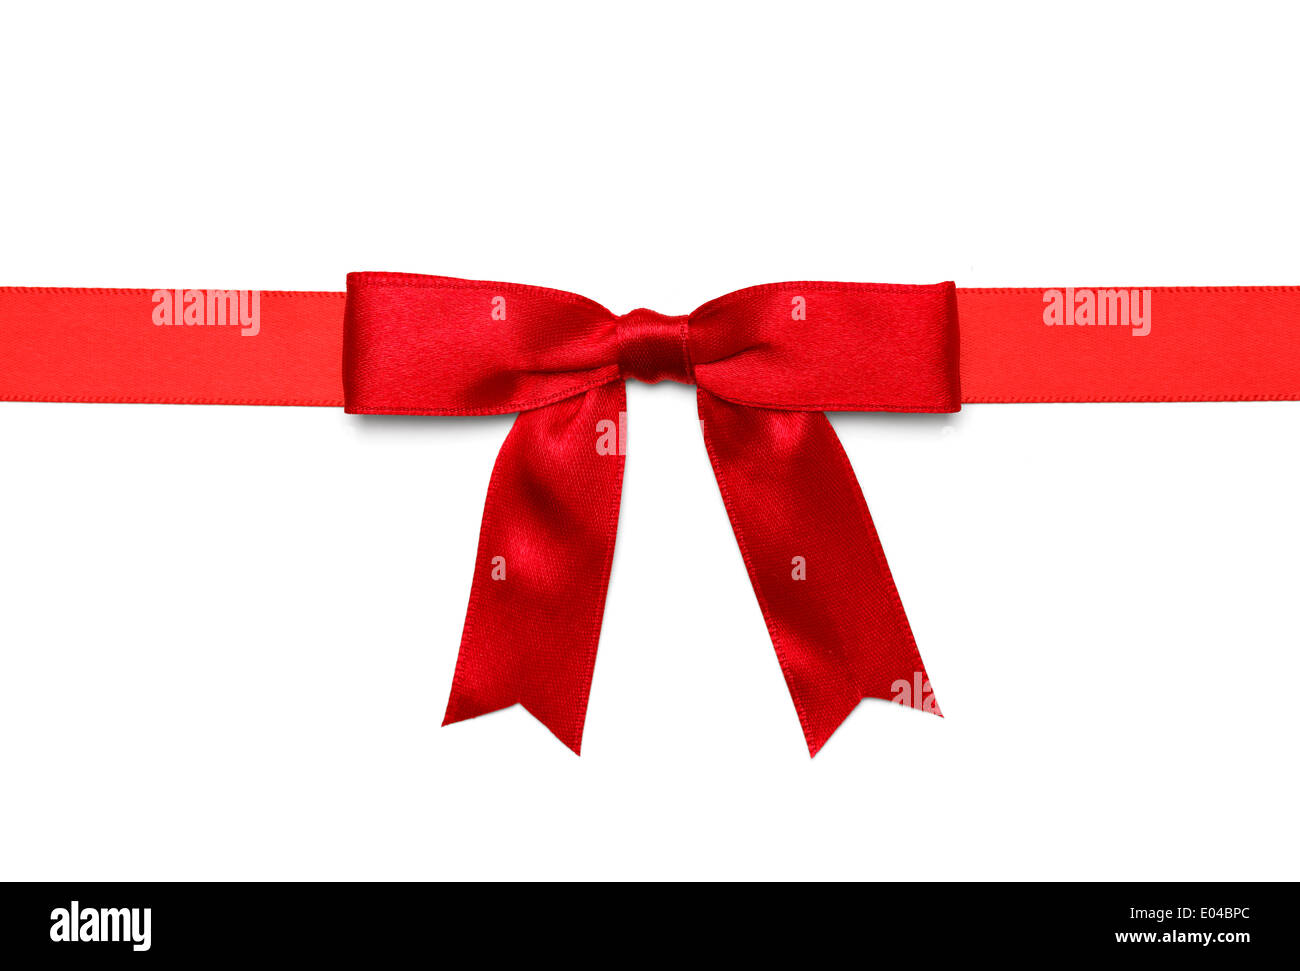 Red Satin Bow With Ribbon Isolated on White Background. Stock Photo